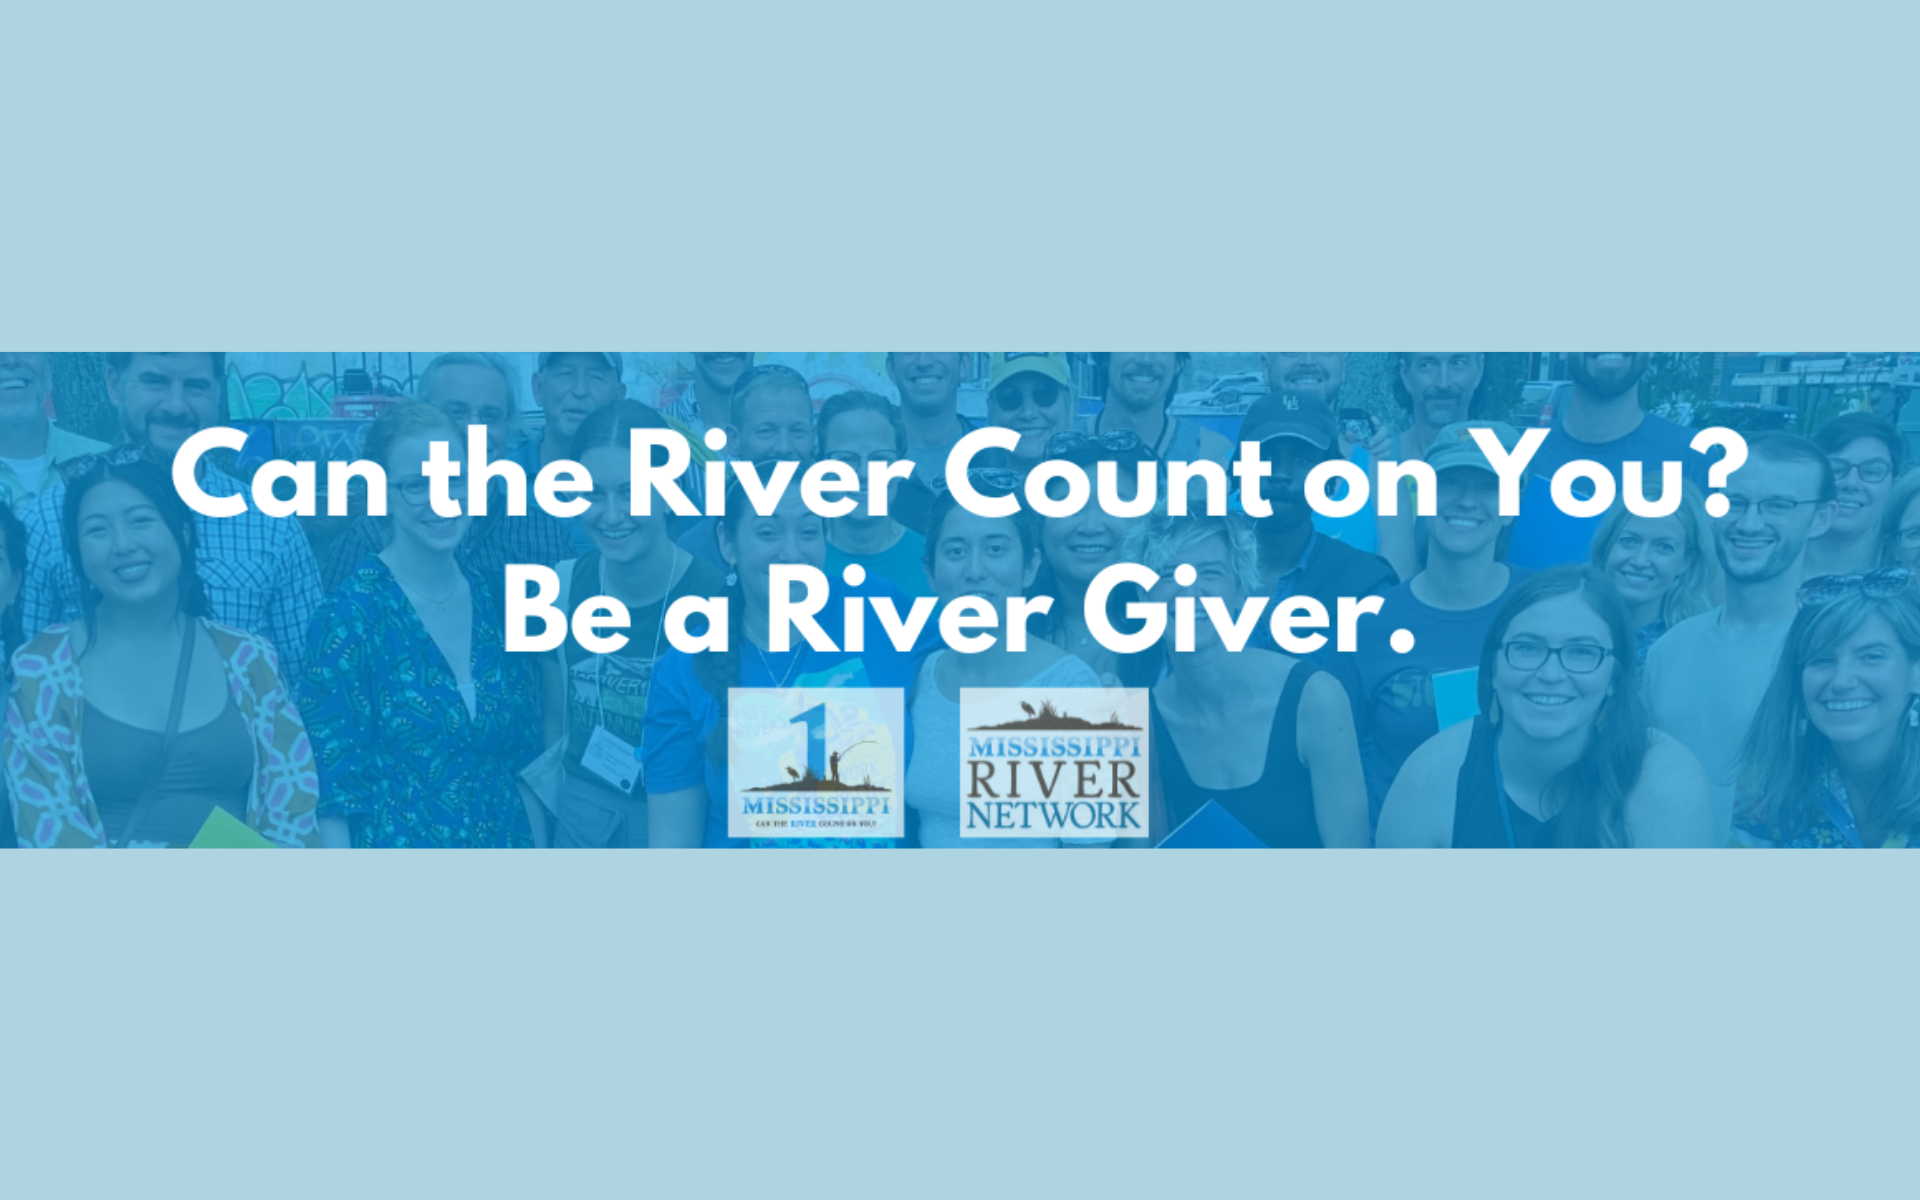 Be a River Giver